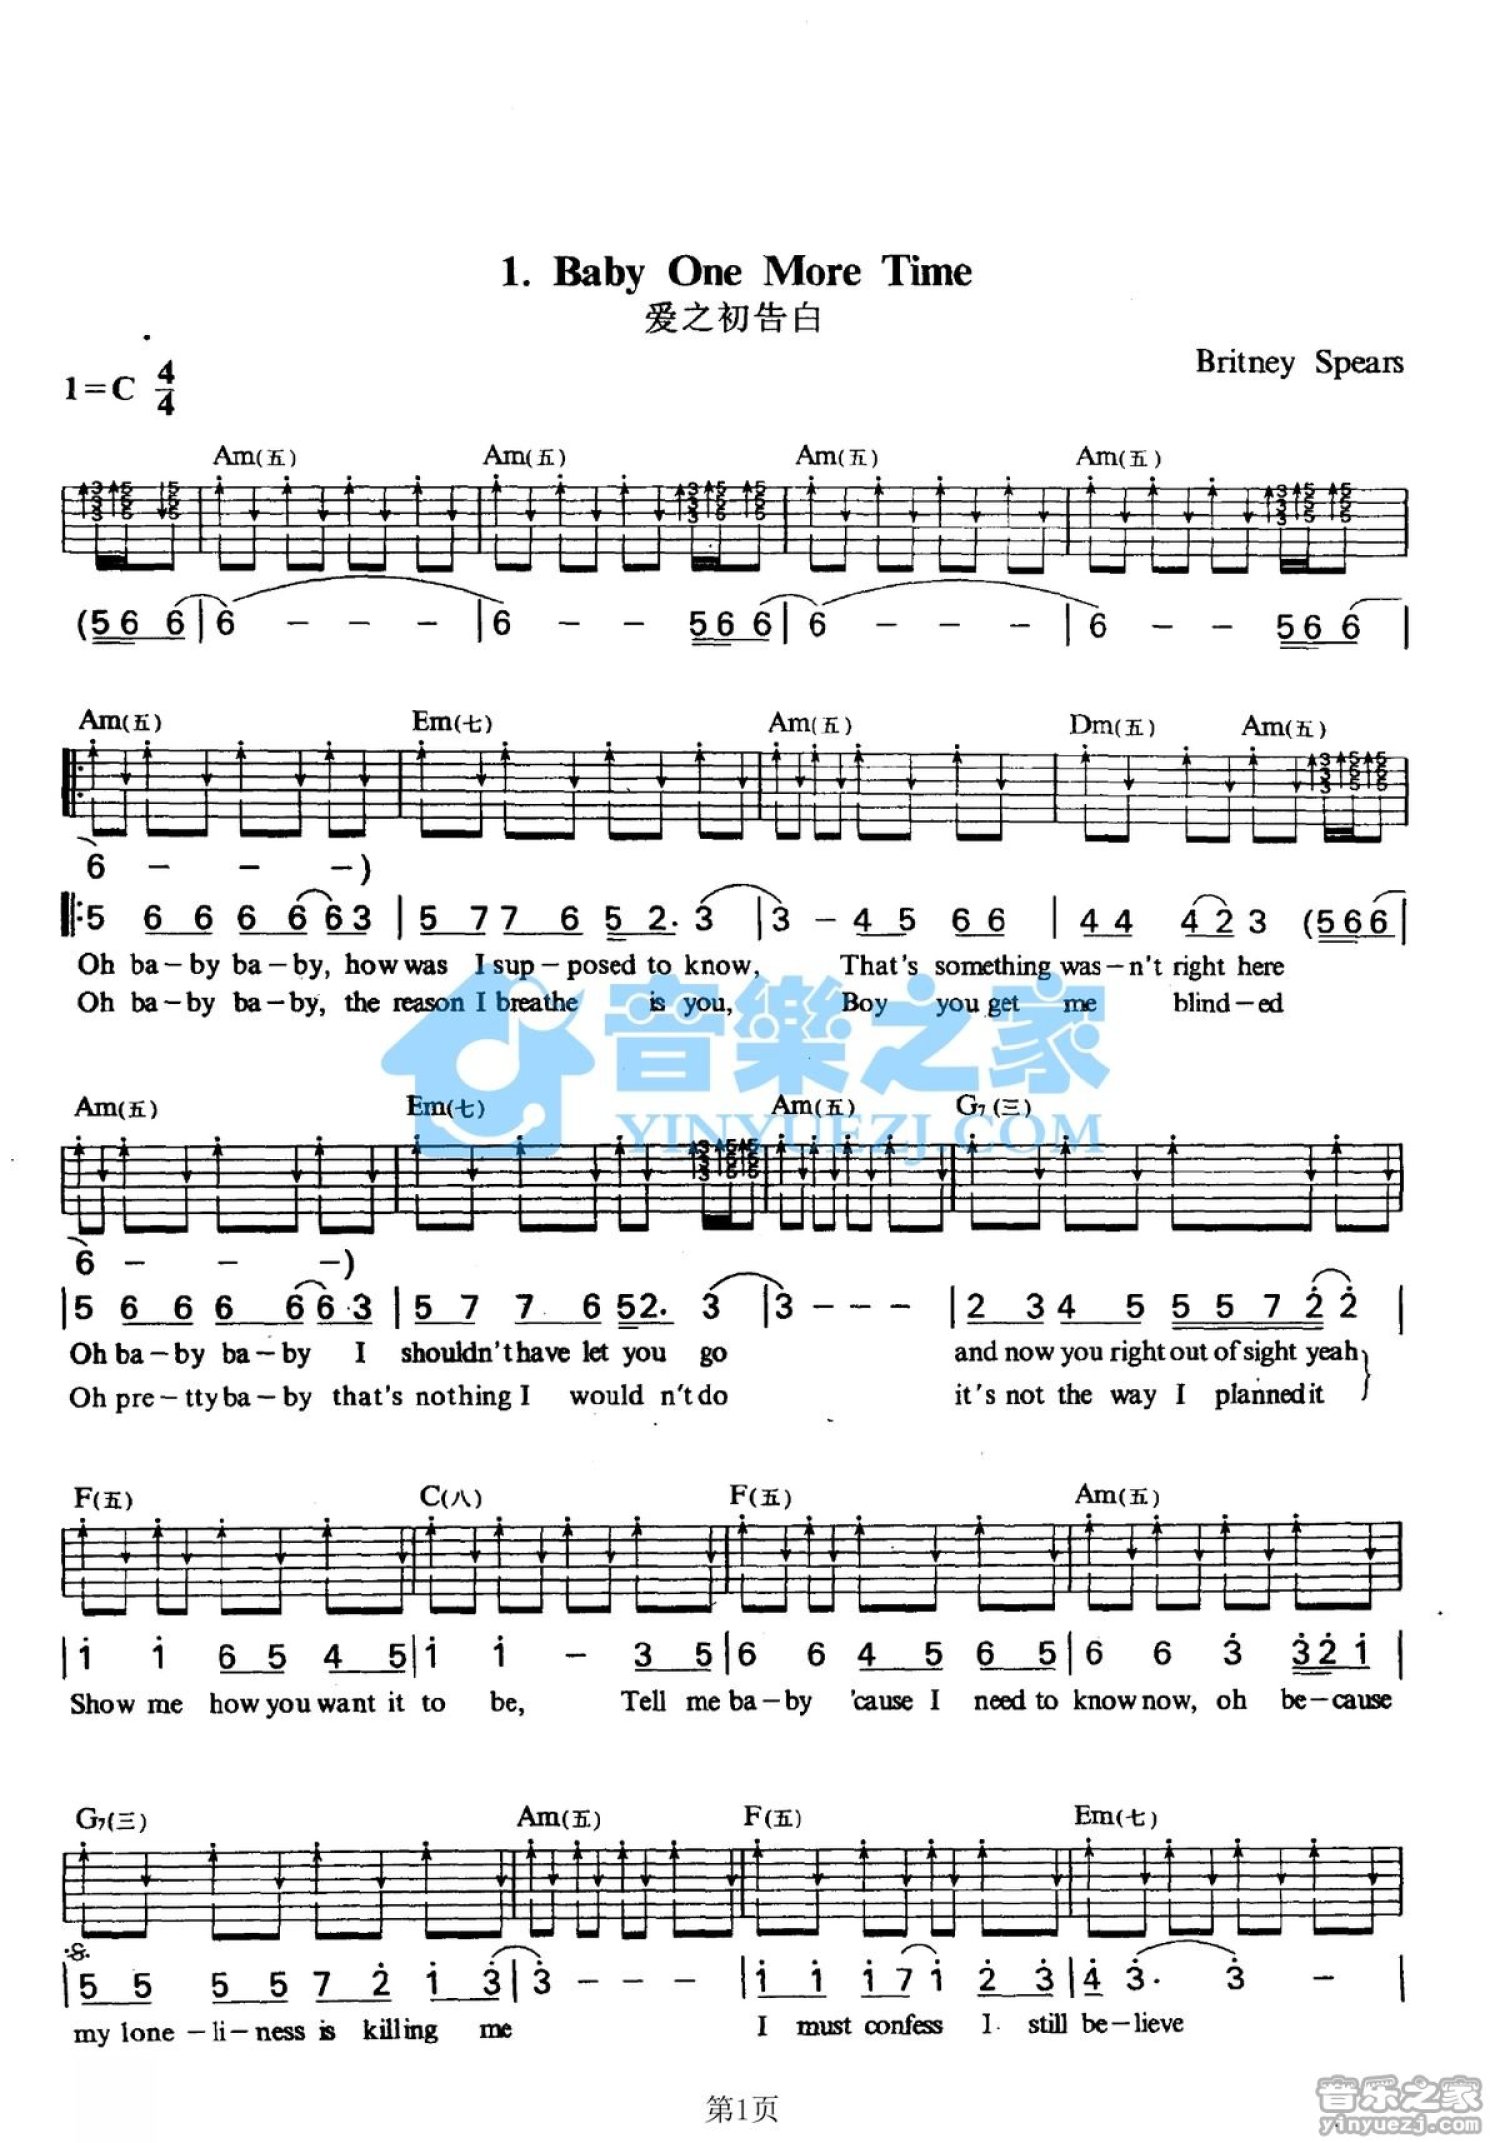 Owl City featuring Carly Rae Jepsen: Good Time sheet music for voice ...